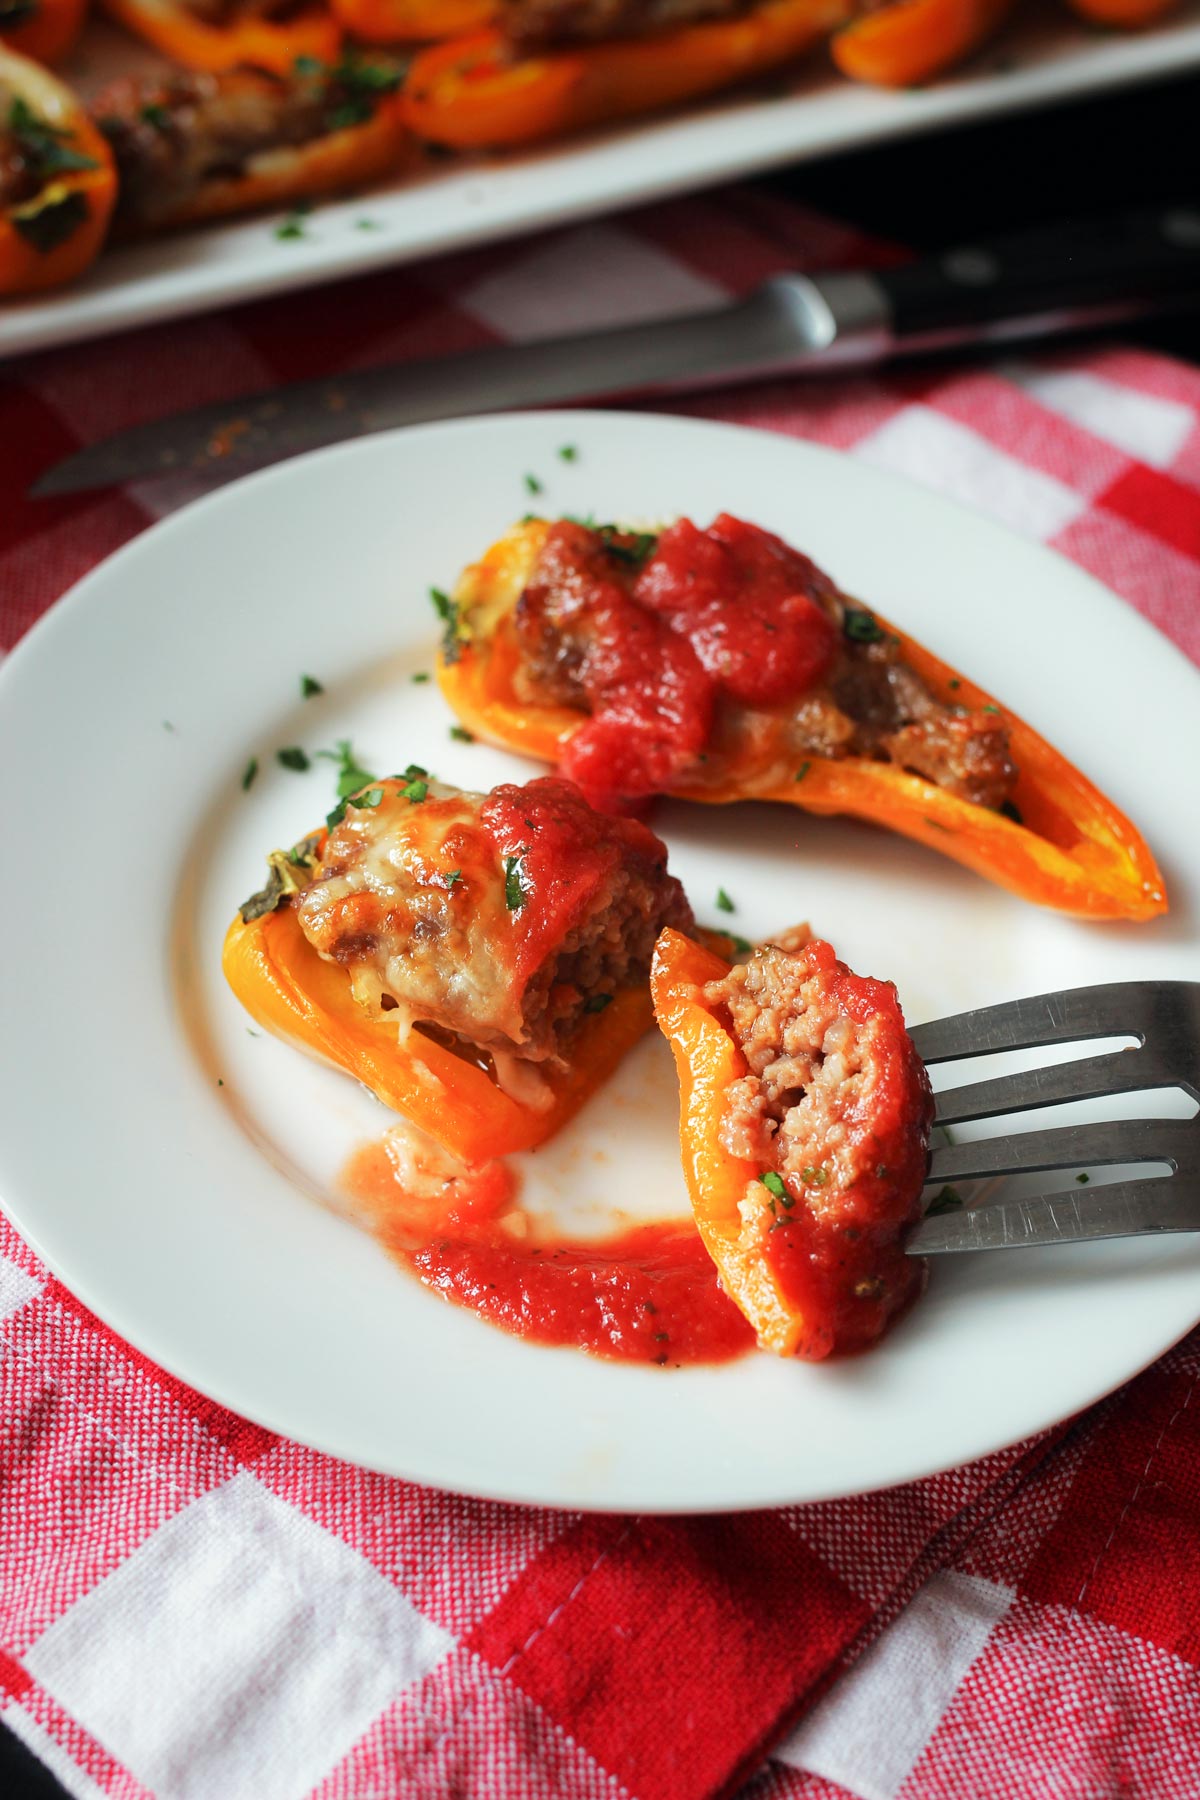 two stuffed mini peppers on a small appetizer plate, one cut in half with a bite on the fork.